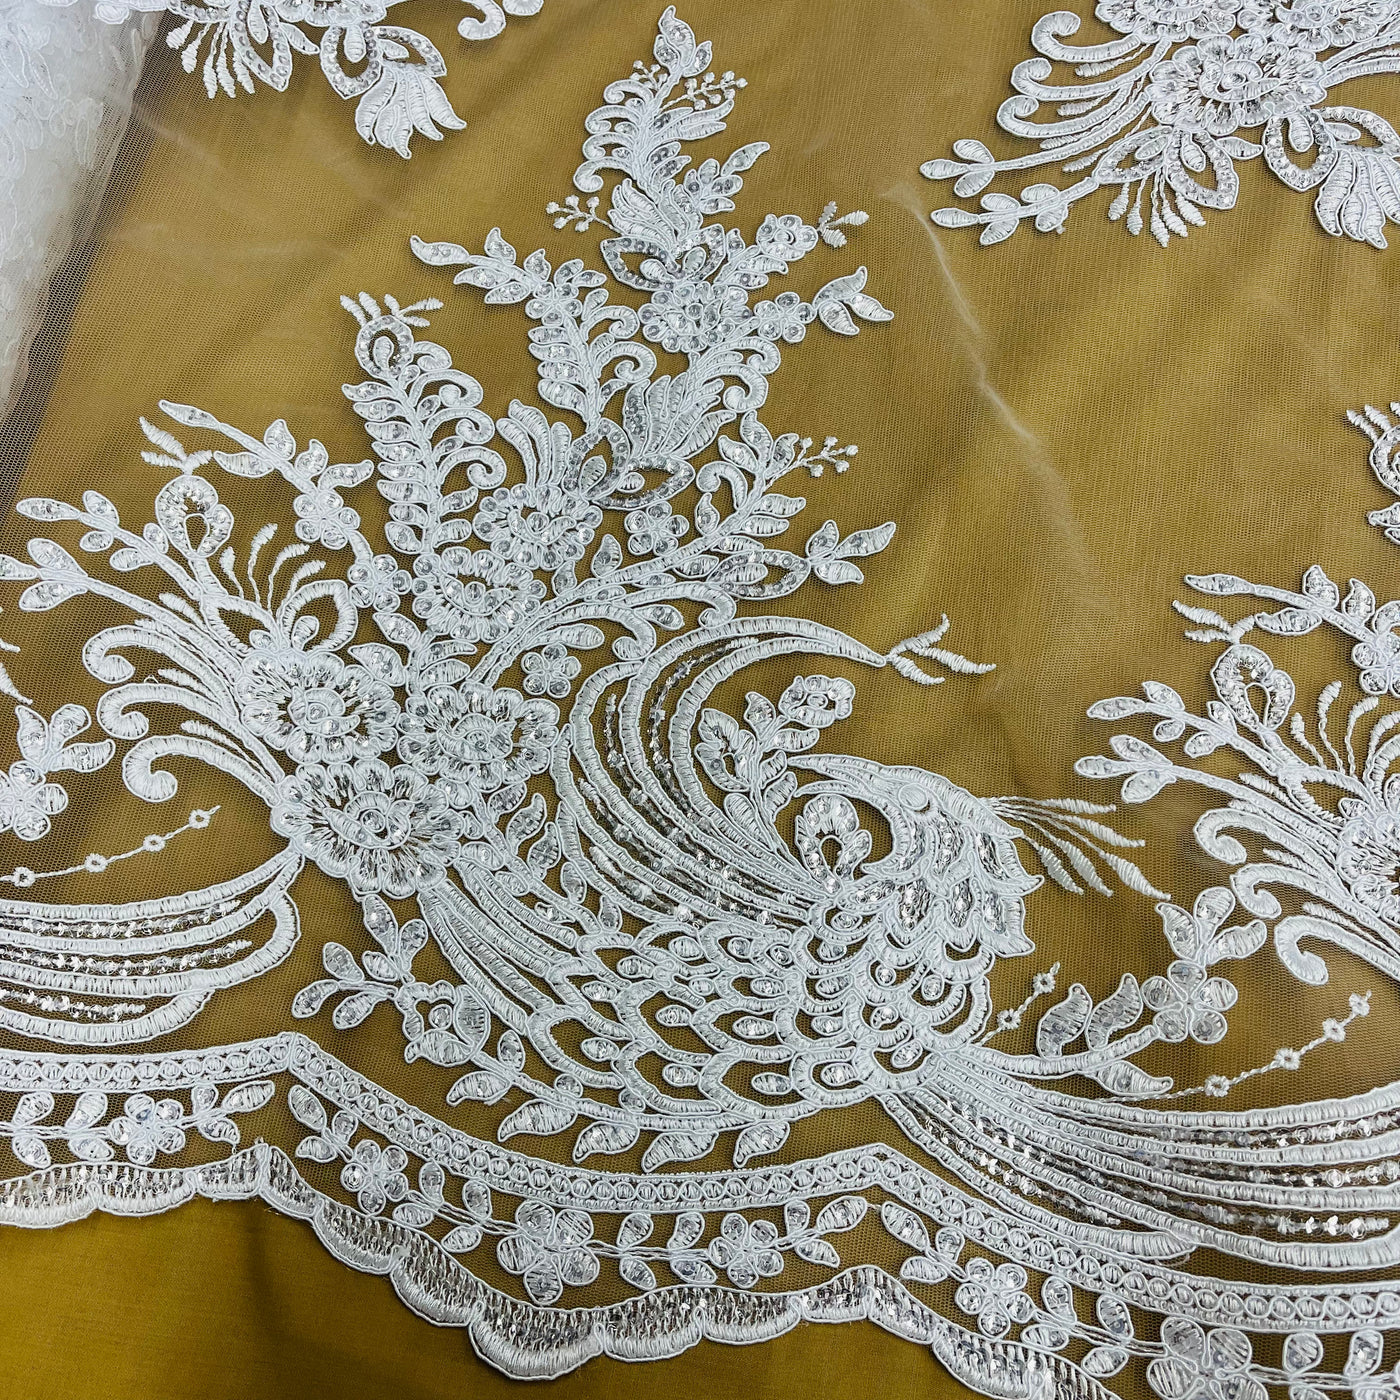 Beaded & Corded Bridal Lace Fabric Embroidered on 100% Polyester Net Mesh | Lace USA 